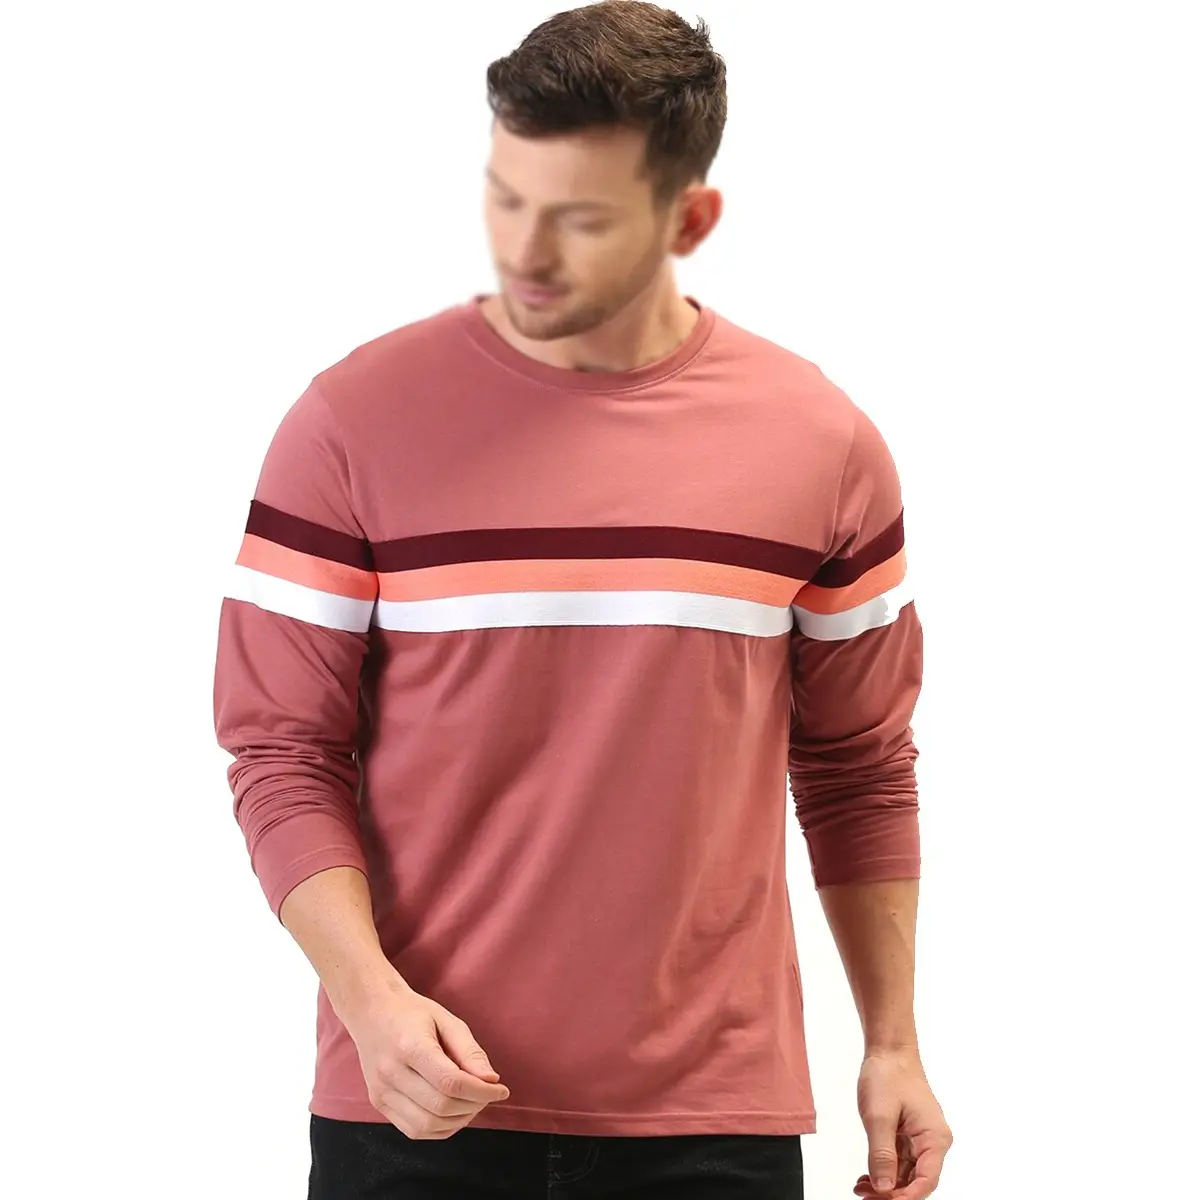 Men Pink Striped Round Neck T-shirt Breathable Slim Fit Top Quality Full Sleeves Men Shirts